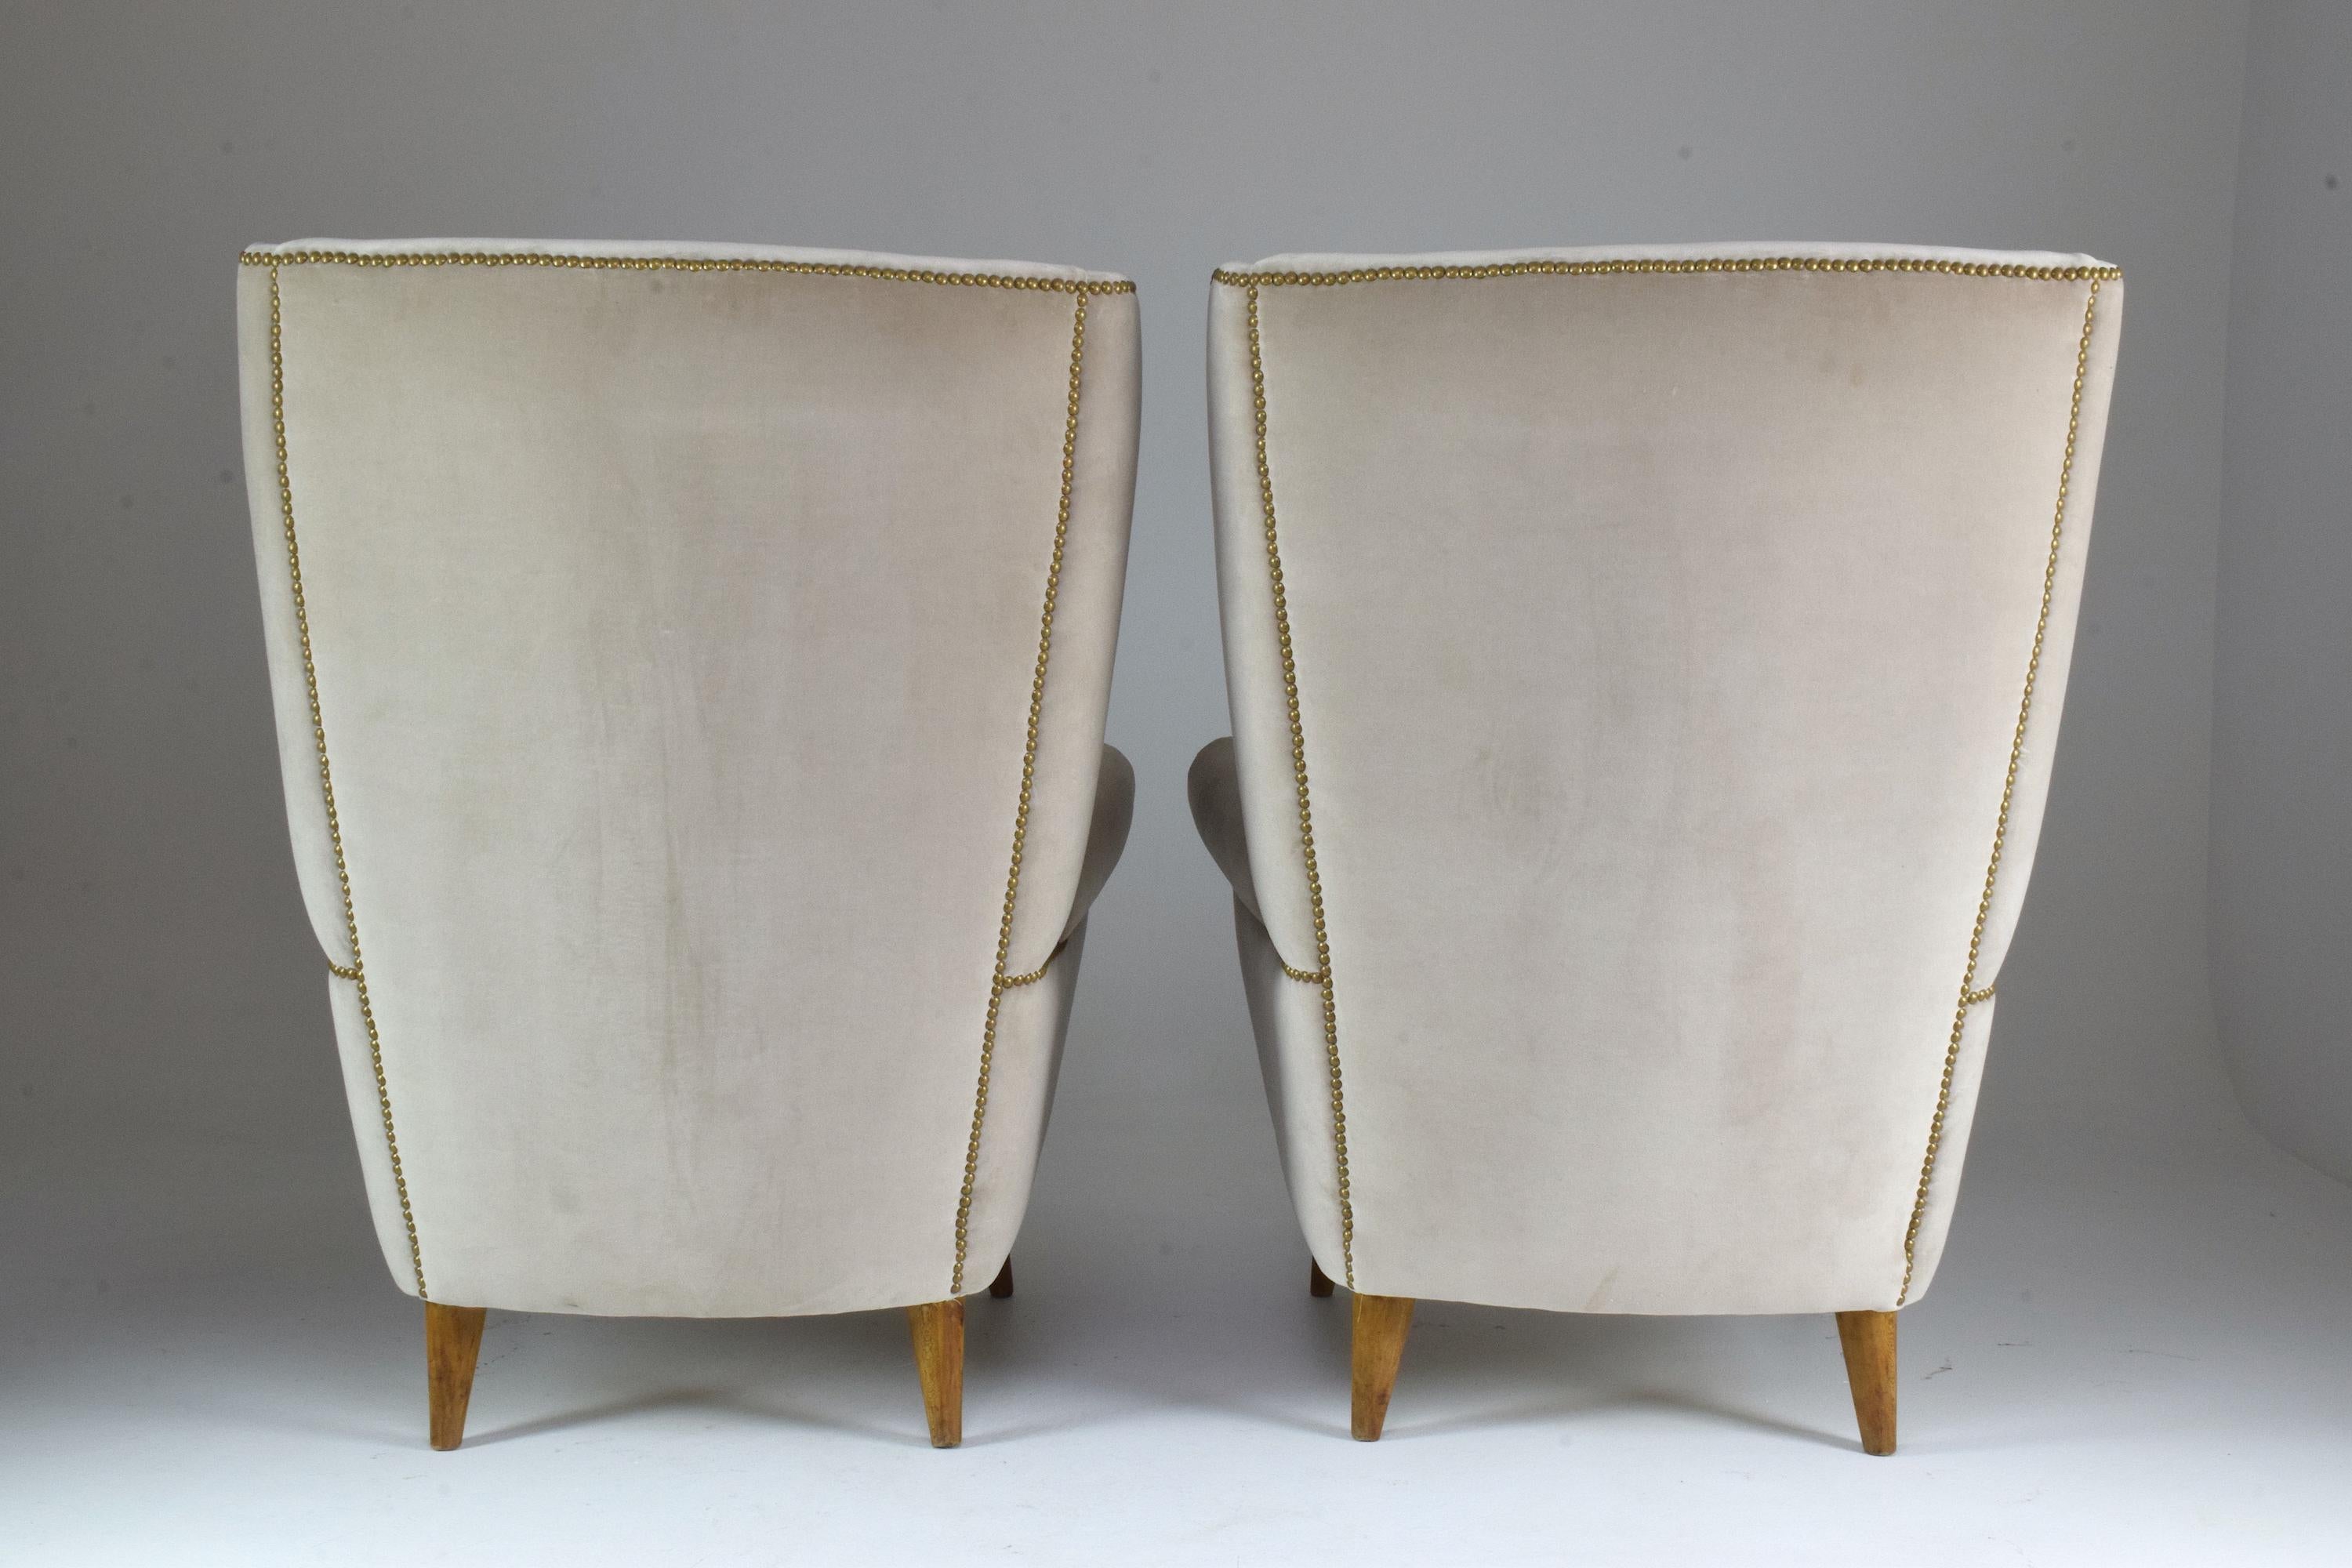 Pair of 20th Century Armchairs In the Style of Gio Ponti, 1940s For Sale 7